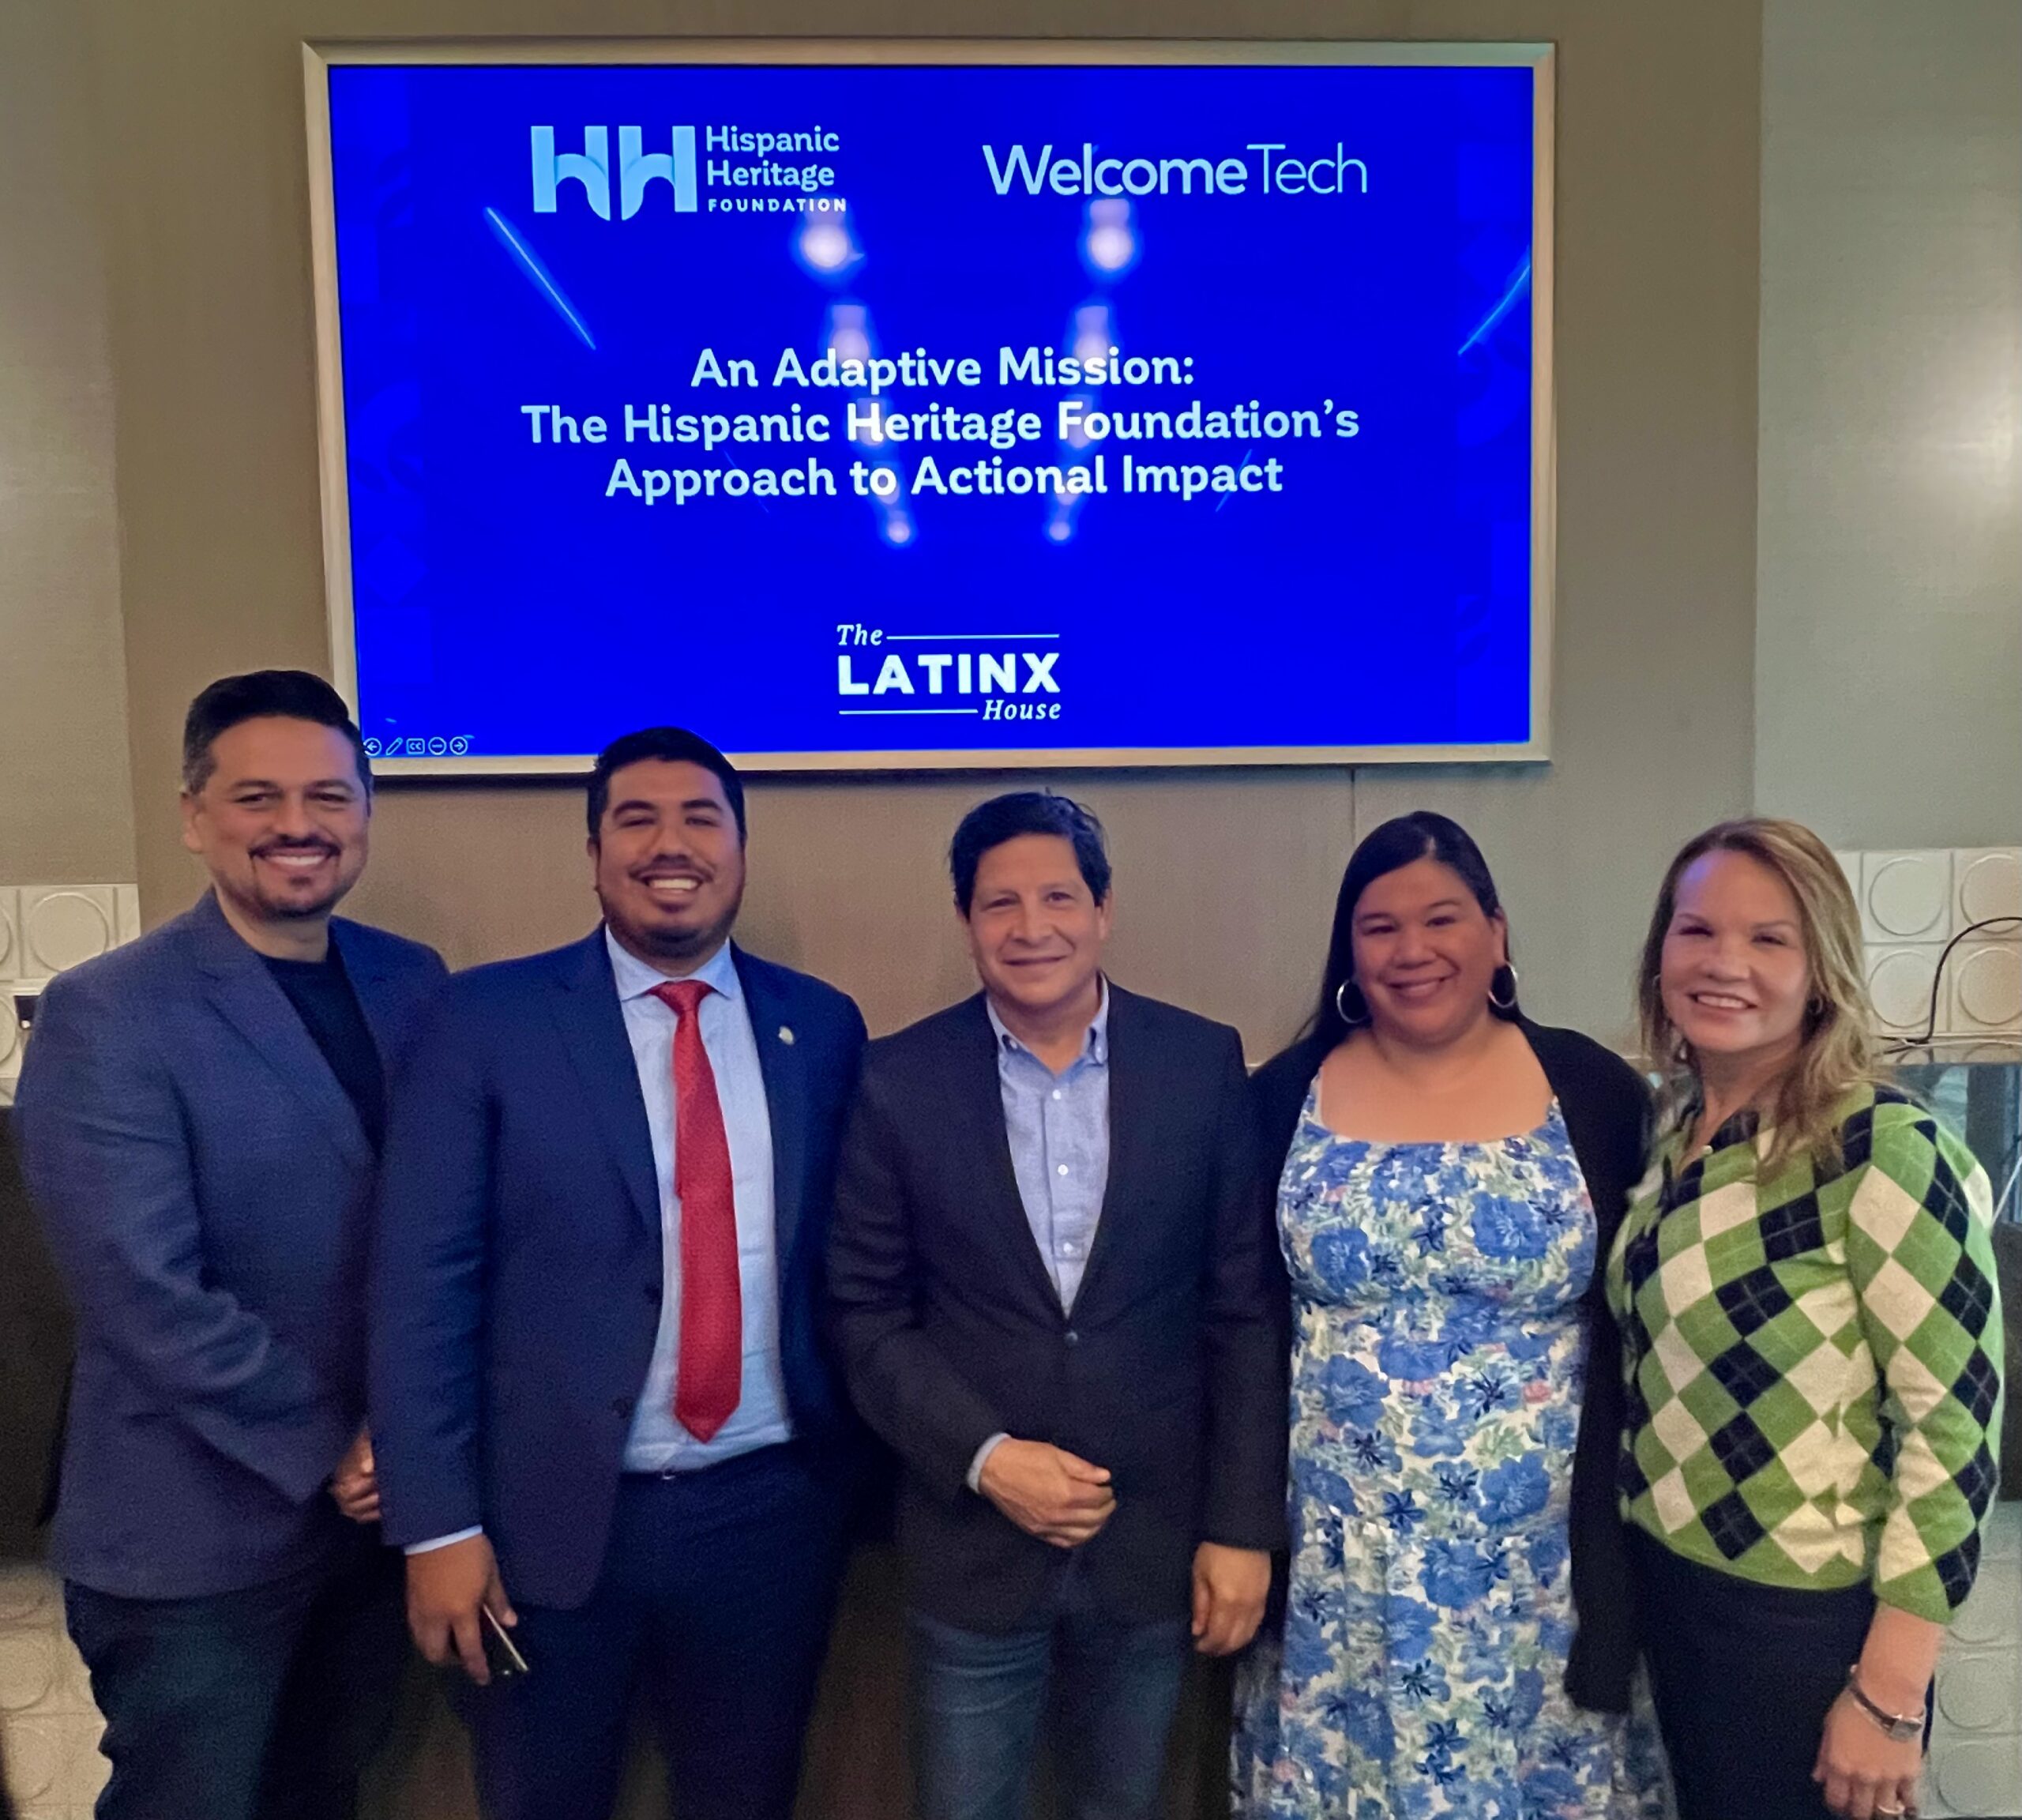 Hispanic Heritage Foundation, Welcome Tech, and The Latinx House hosted a brunch at J-Prime SteakHouse in Austin to present HHF’s unique ‘Adaptive Mission’ Approach to Actionable Impact